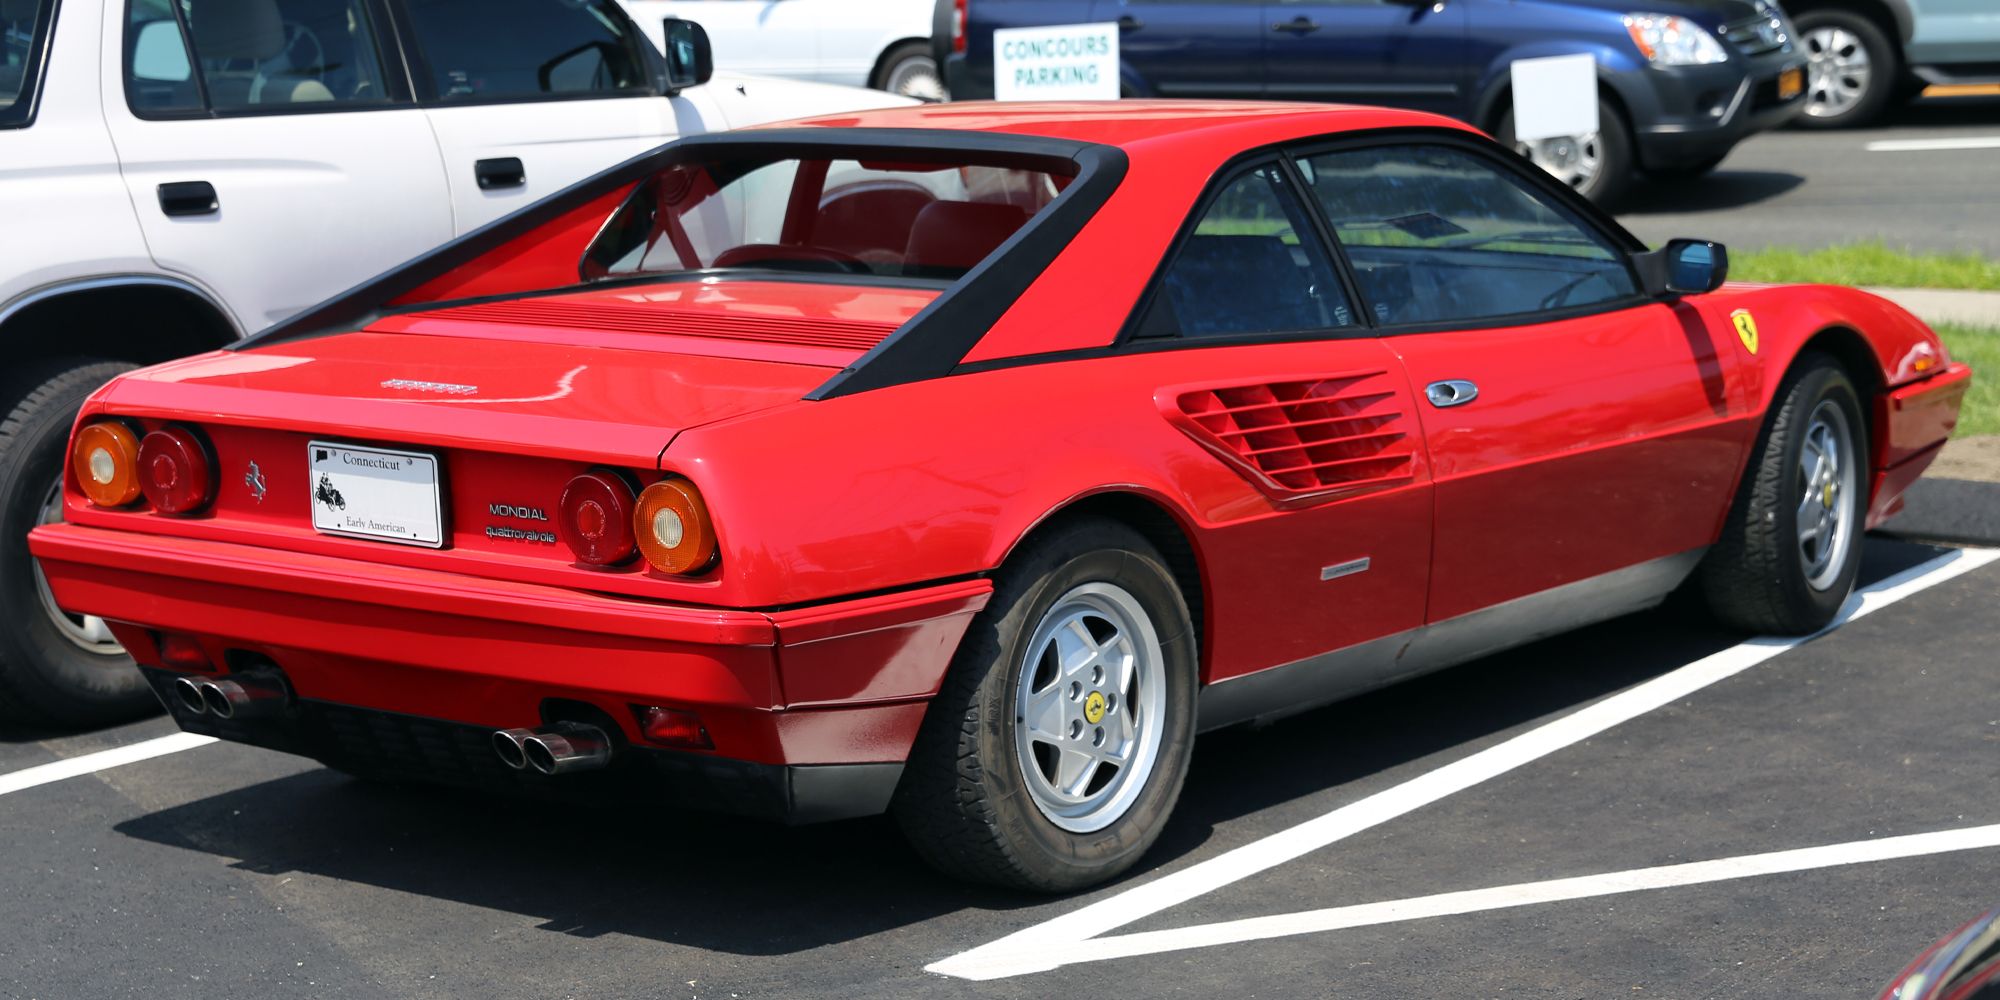 Rear 3/4 view of a red Mondial